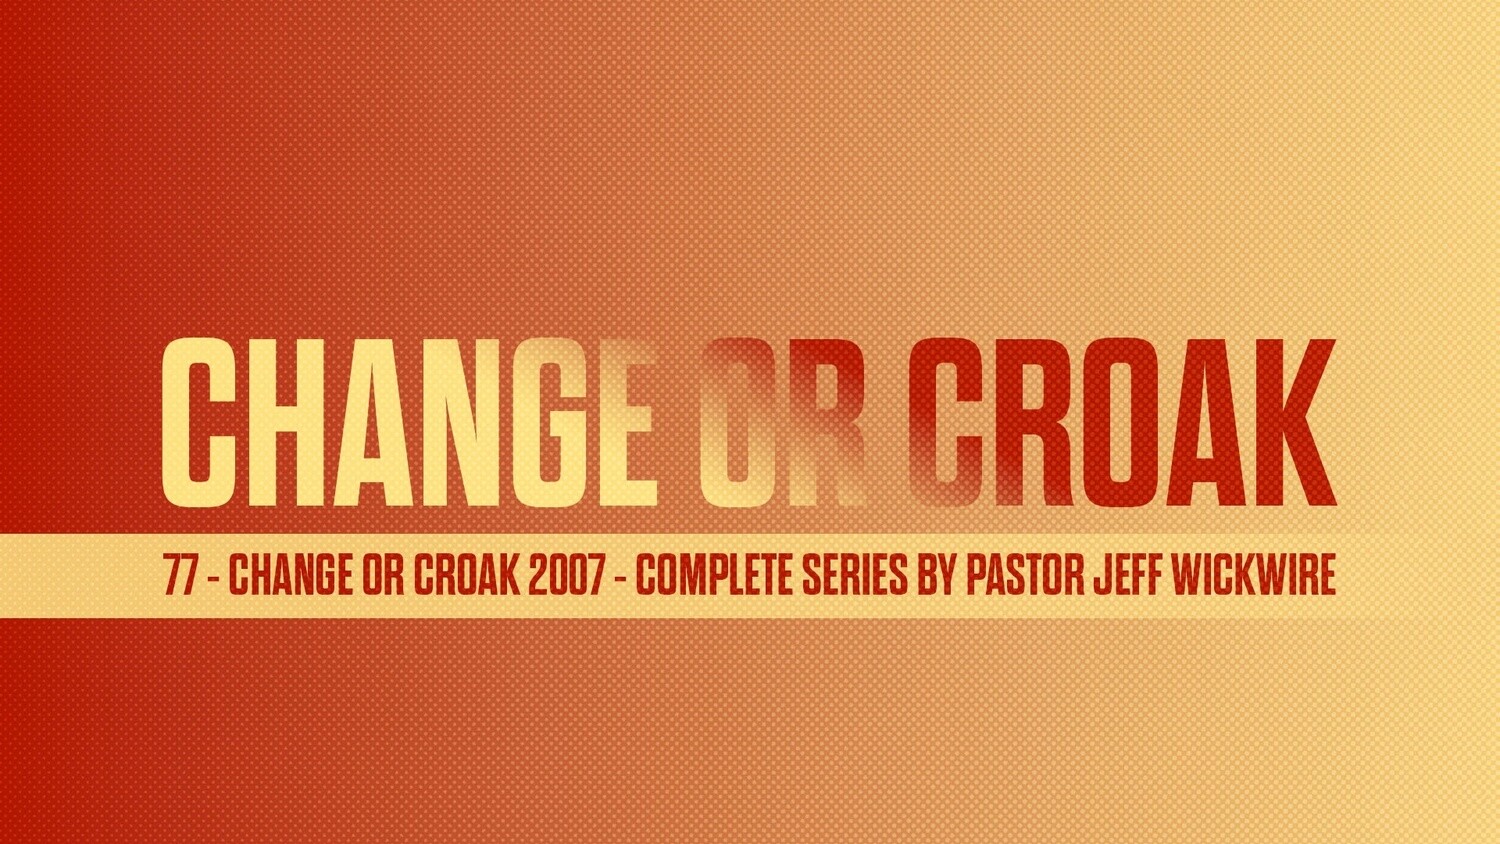 77 - Change Or Croak 2007 - Complete Series By Pastor Jeff Wickwire